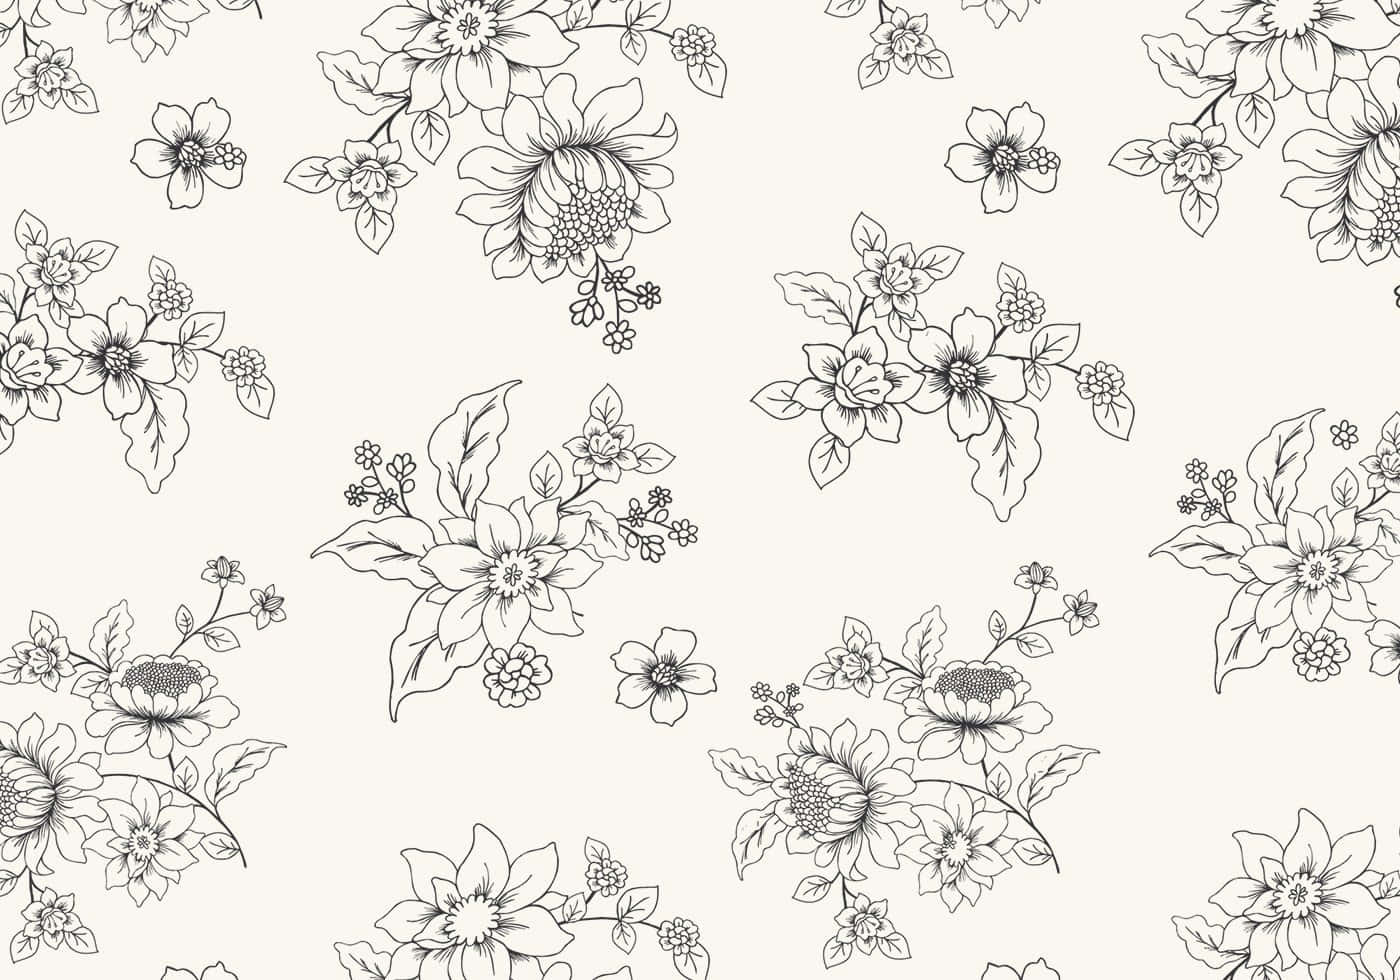 A beautiful, intricately detailed flower drawing. Wallpaper